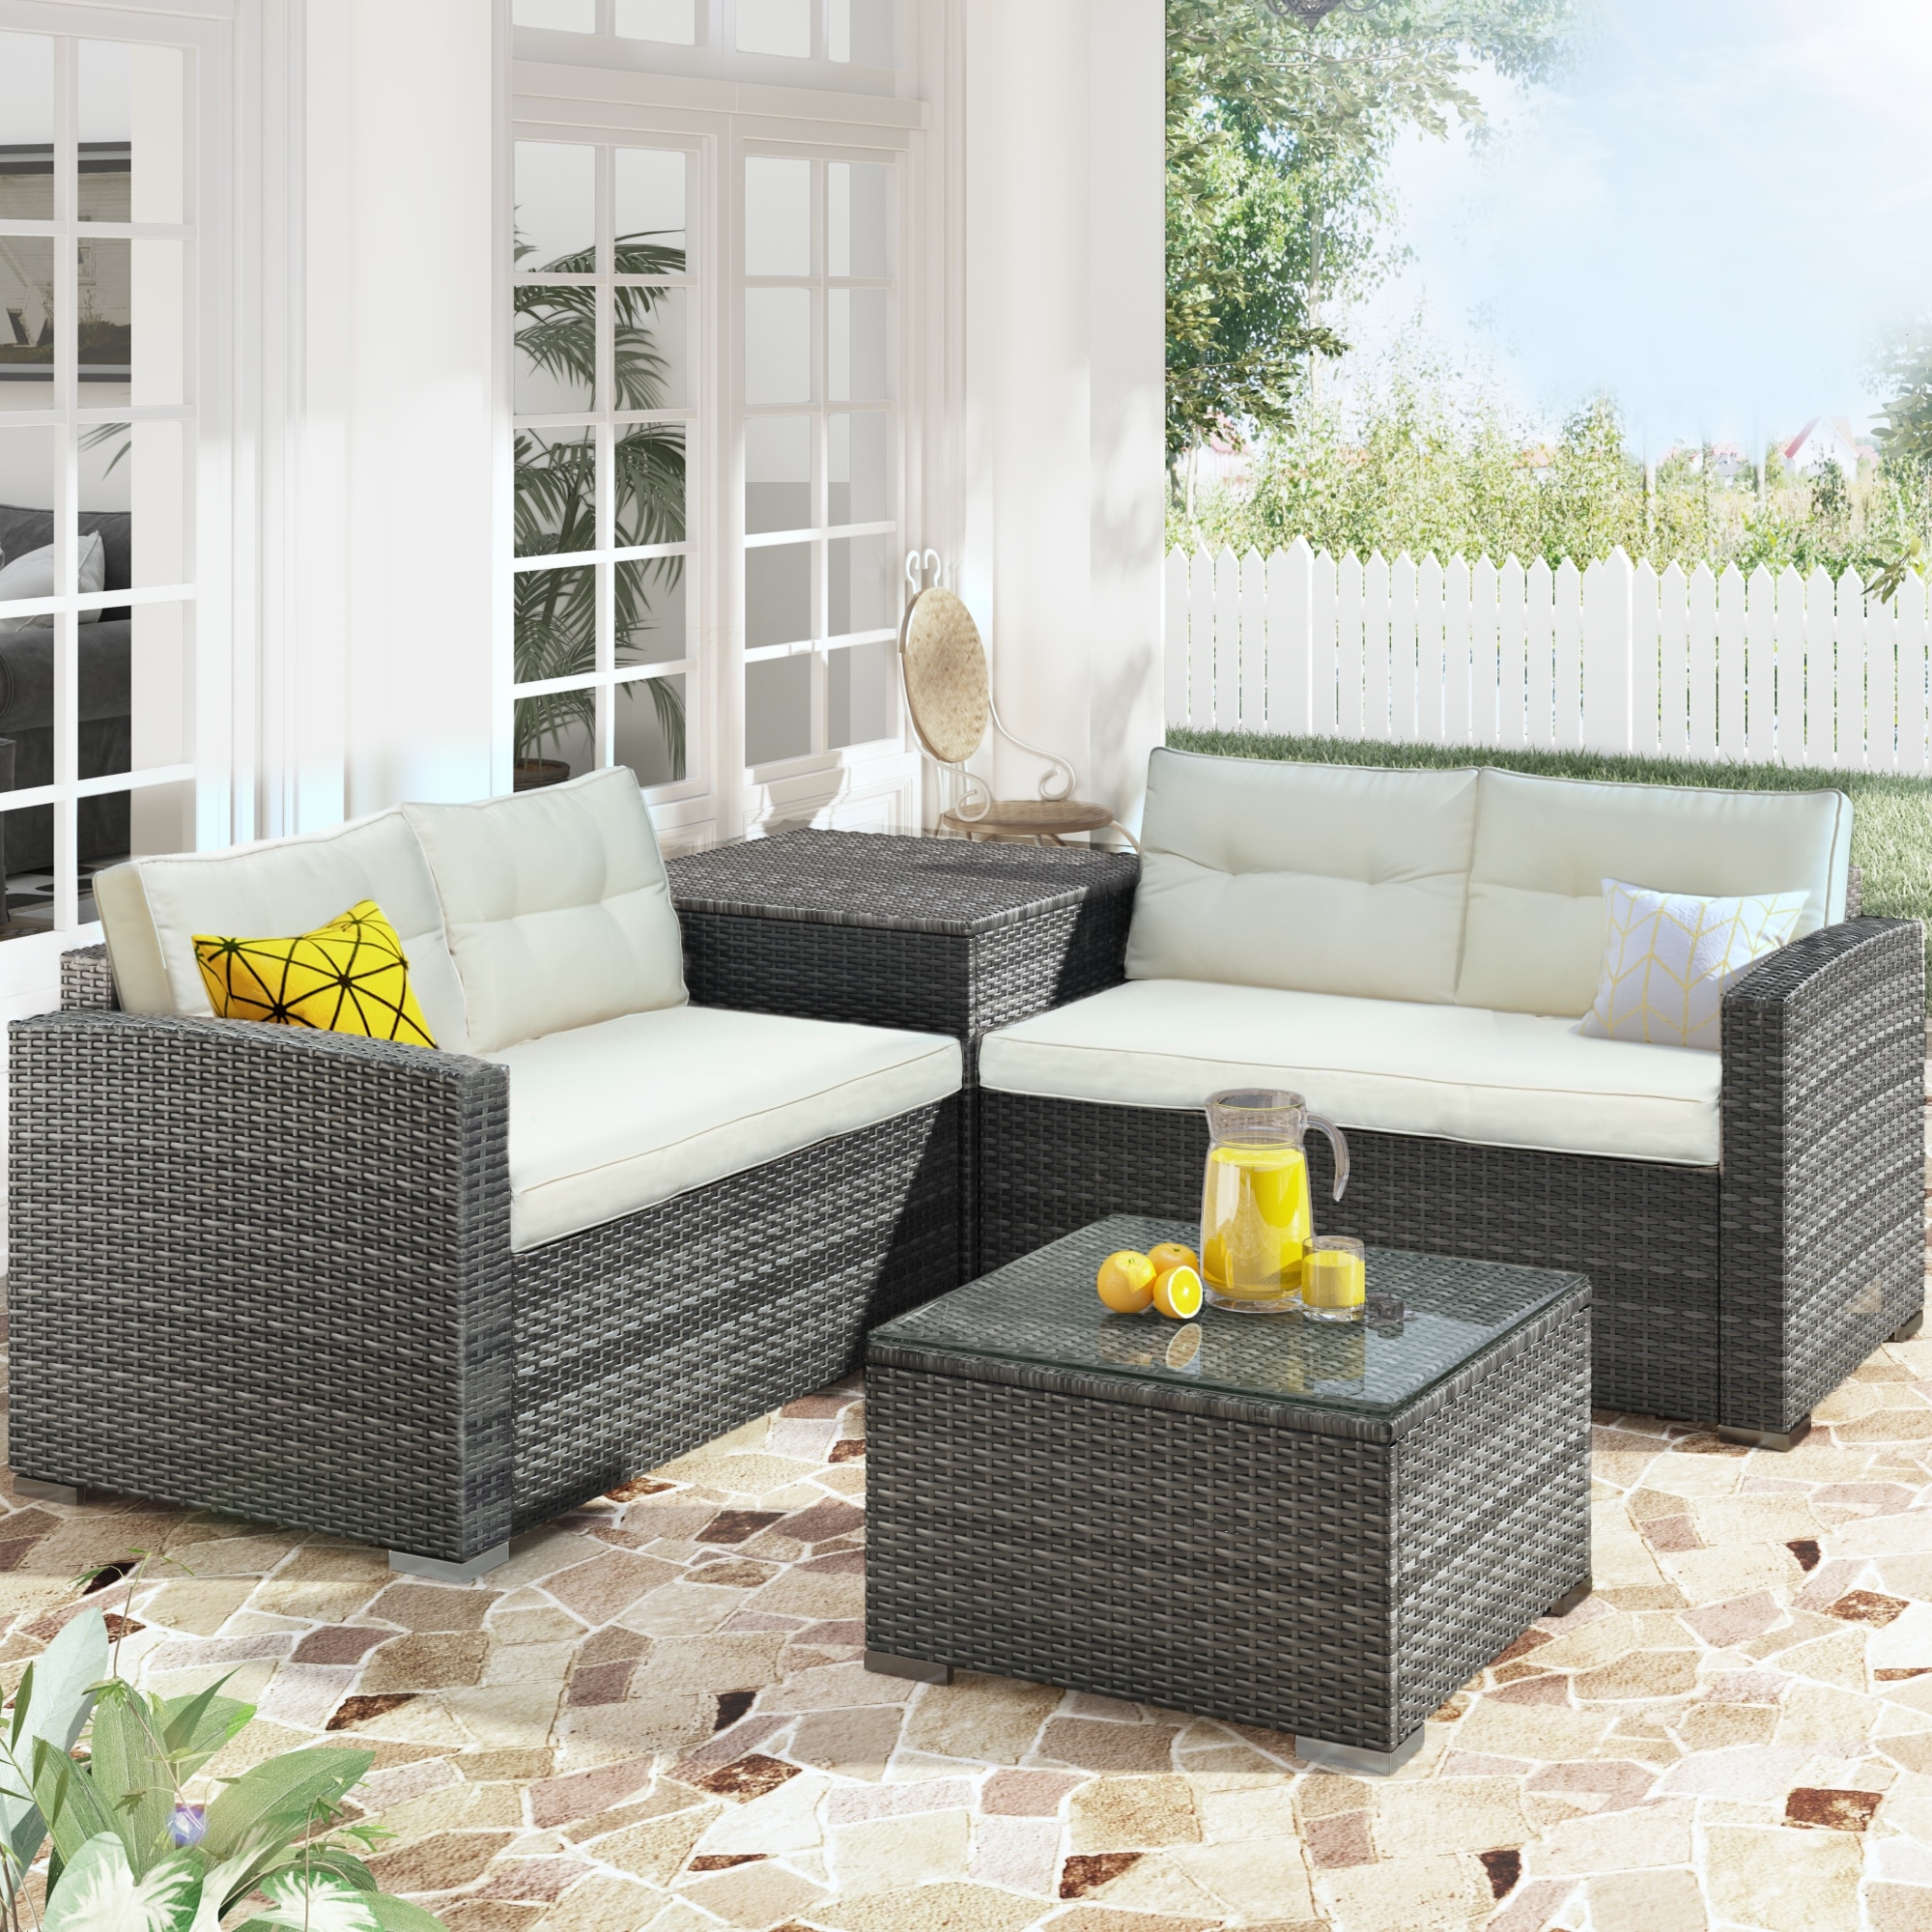 Modern 4 Piece Outdoor Patio Furniture Pe Rattan Loveseat Set With Large Storage Box And Glass Table  Deep Seating Design